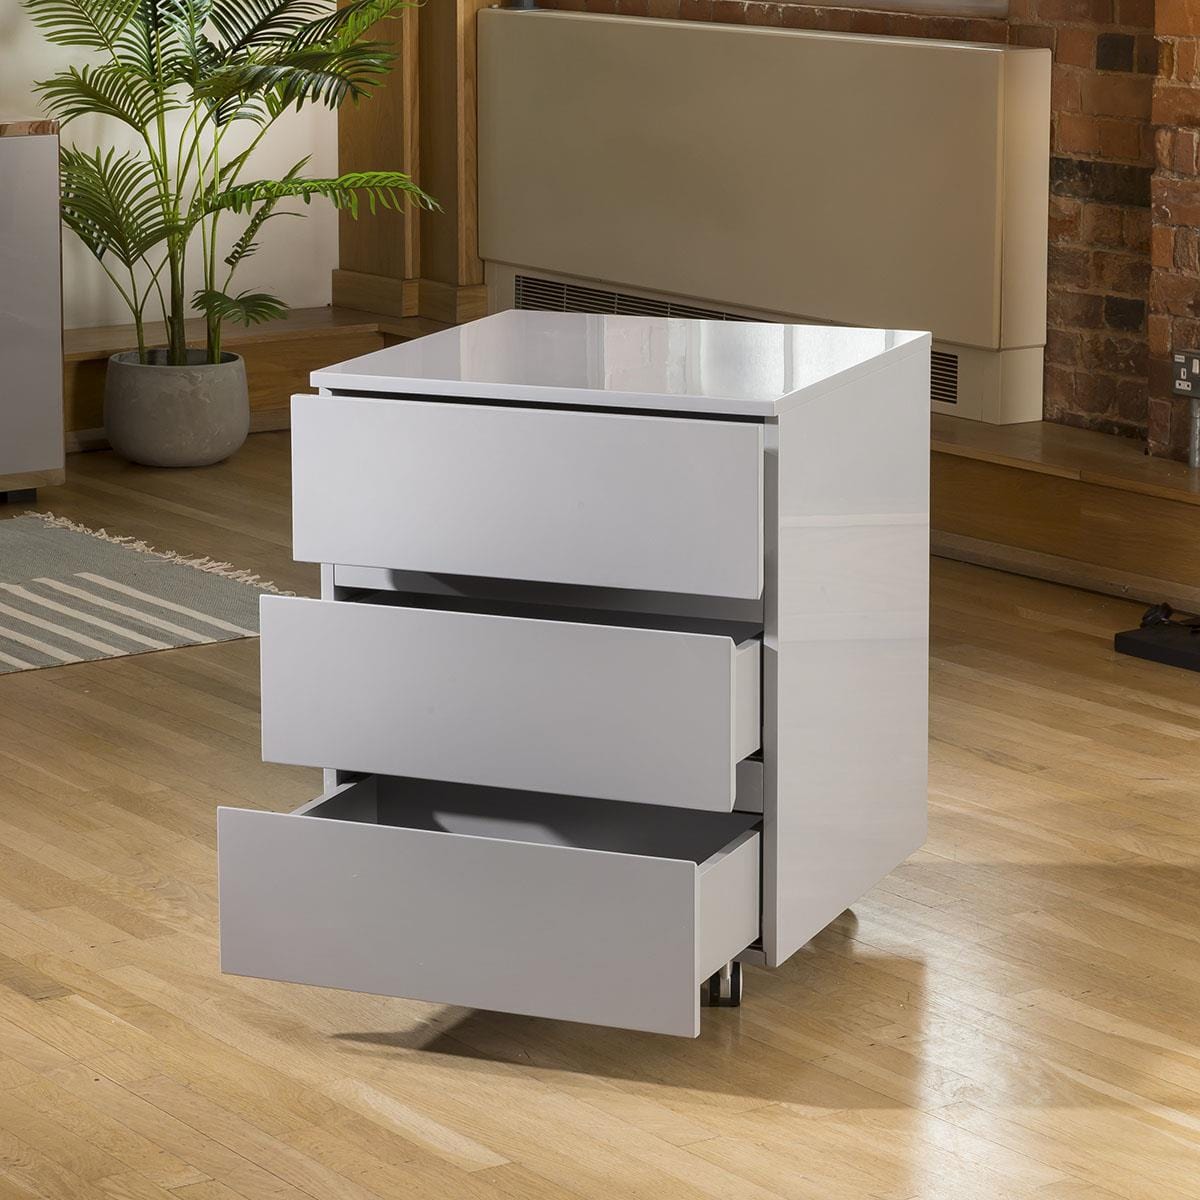 Quatropi 2 Desk arrangement in a grey gloss and stainless finish with chest of drawers